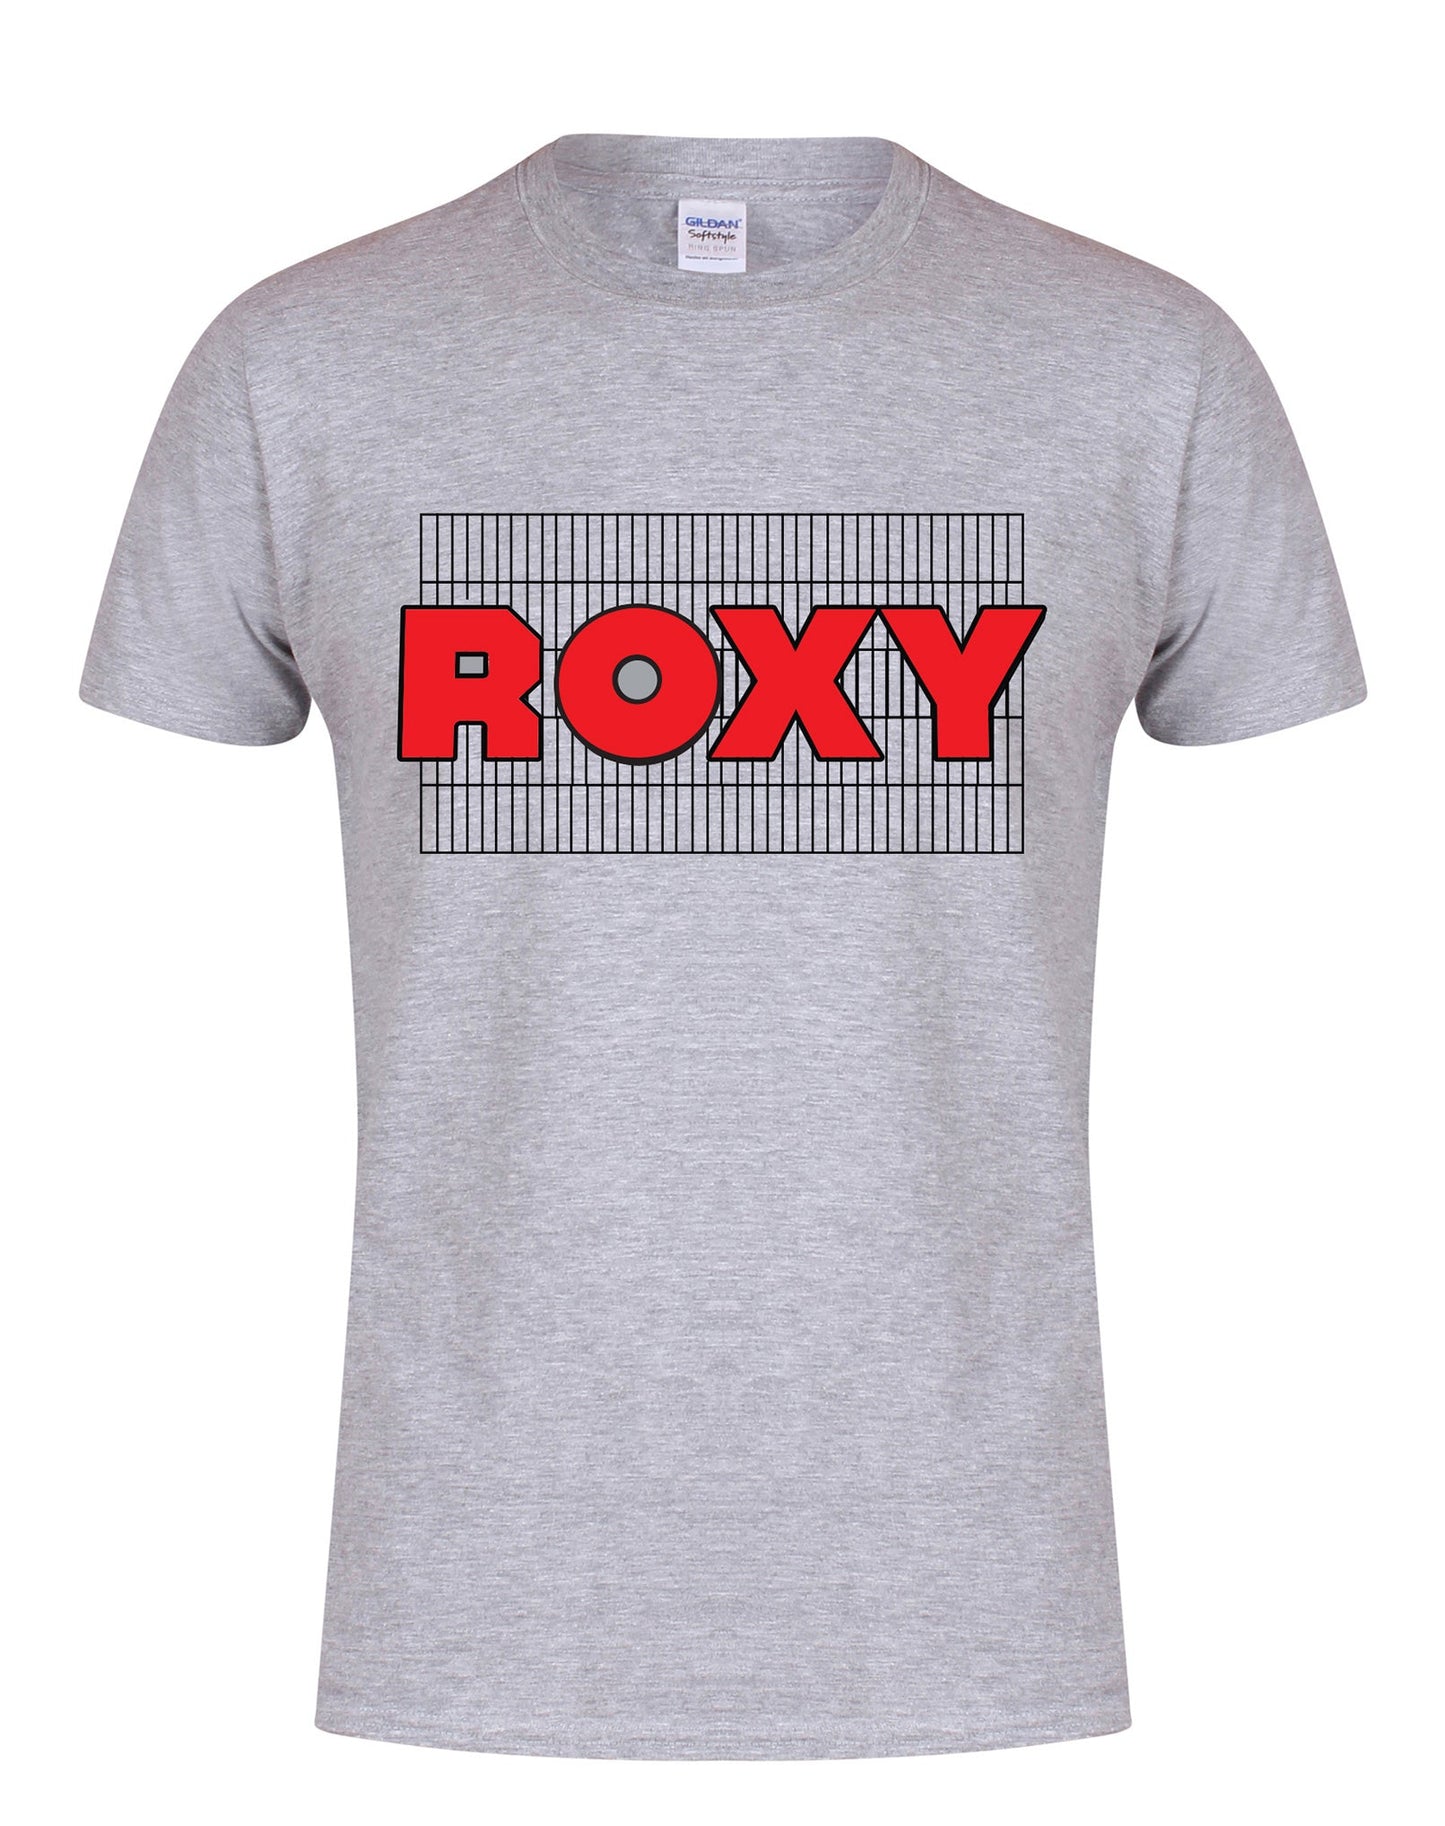 Roxy unisex fit T-shirt - various colours - Dirty Stop Outs